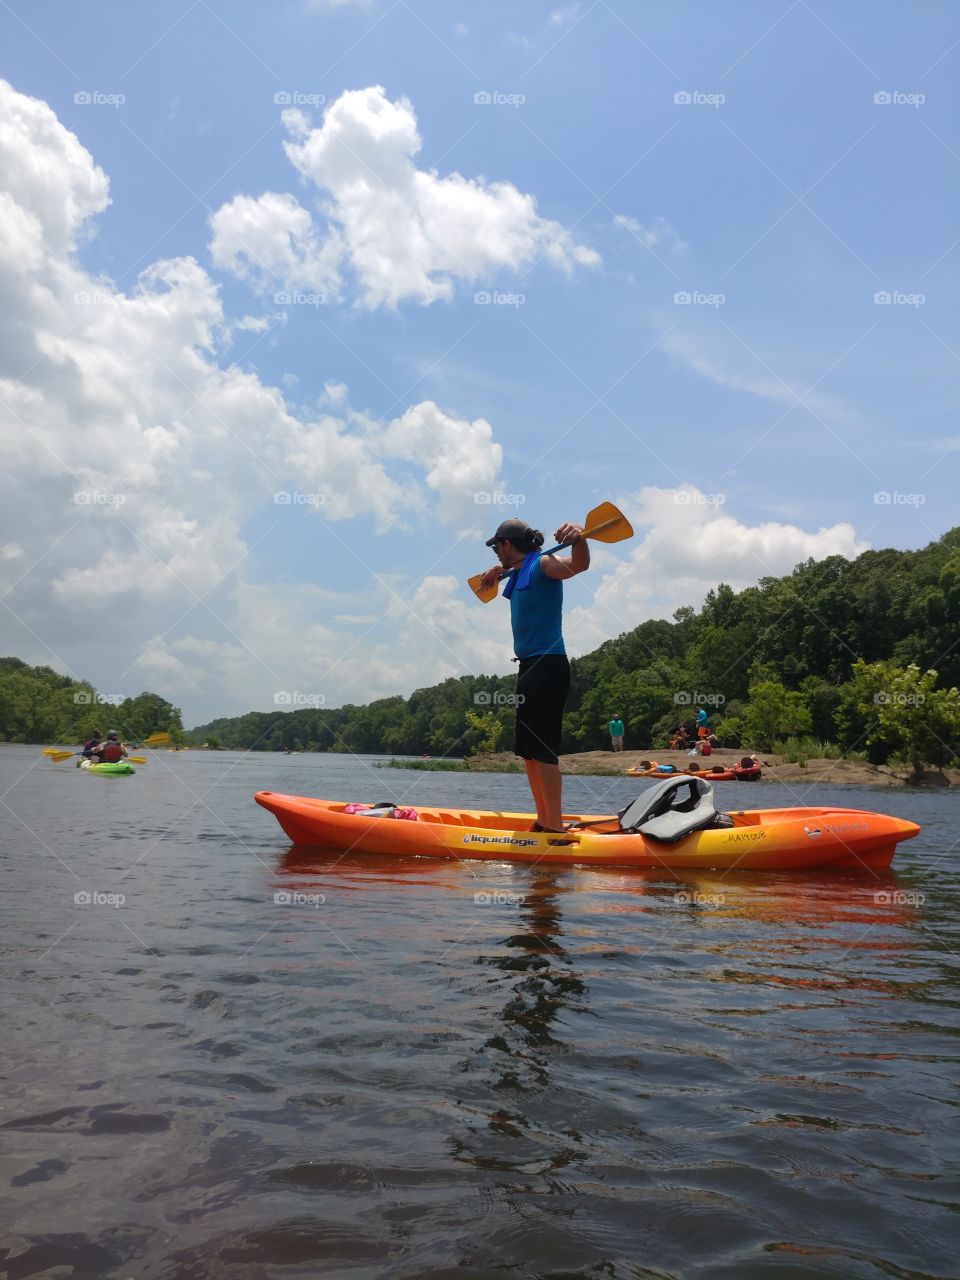 Kayaking on a beautiful day at the Coosa river while my friend shows off.